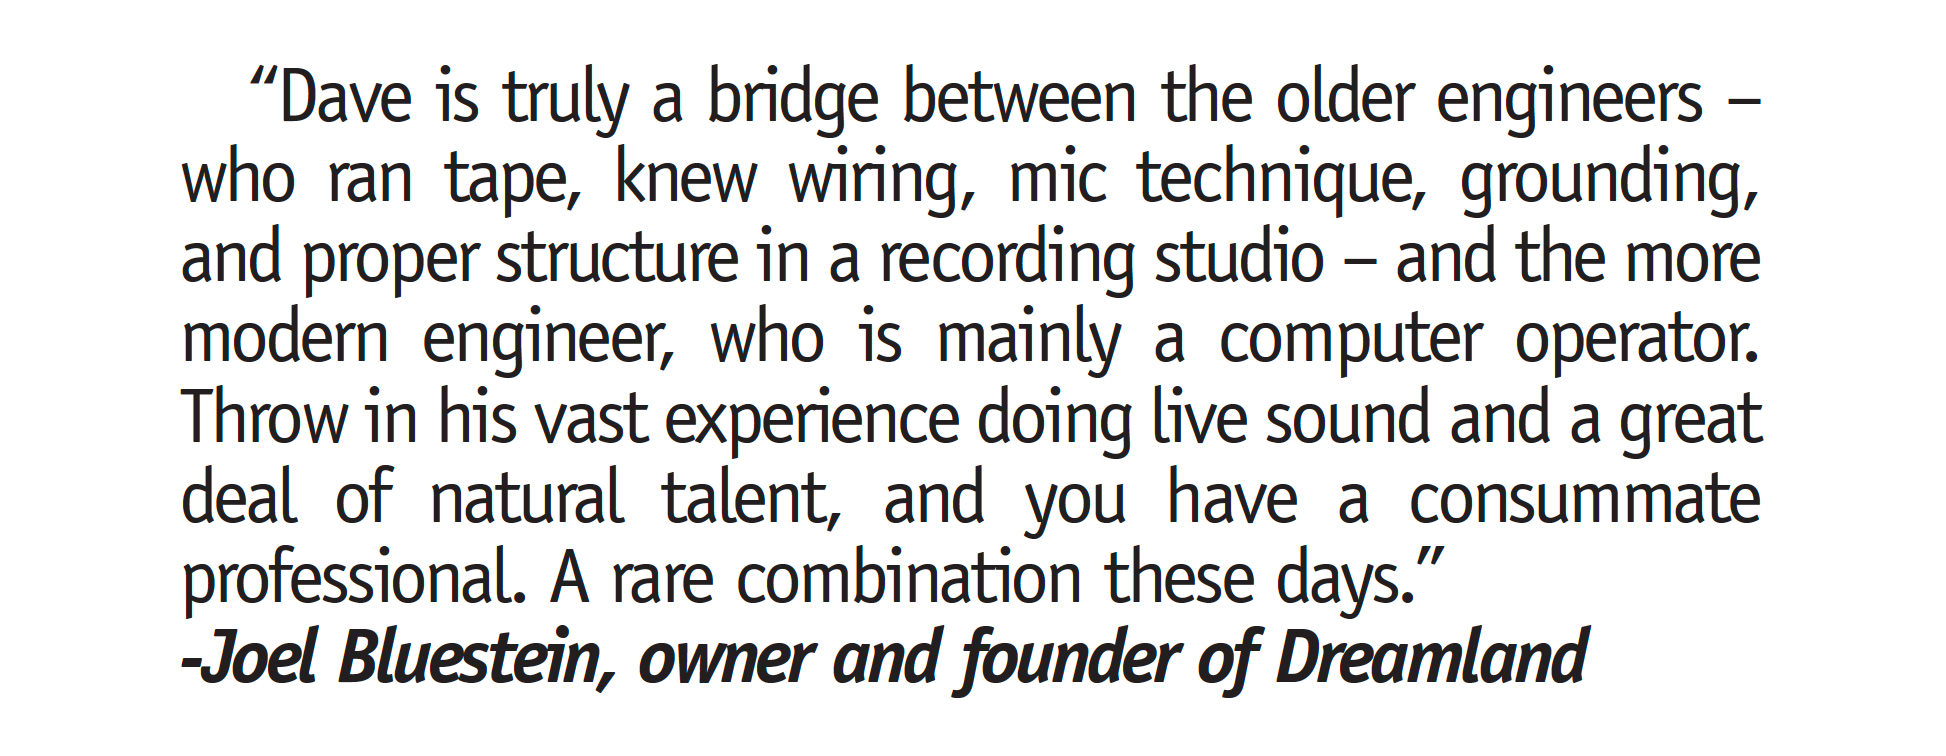 "Dave is truly a bridge between the older engineers - who ran tape, knew wiring, mic technique, grounding, and proper structure in a recording studio - and the more modern engineer, who is mainly a computer operator. Throw in his vast experience doing live sound and a great deal of natural talent, and you have a consummate professional. A rare combination these days." -Joel Bluestein, owner and founder of Dreamland"